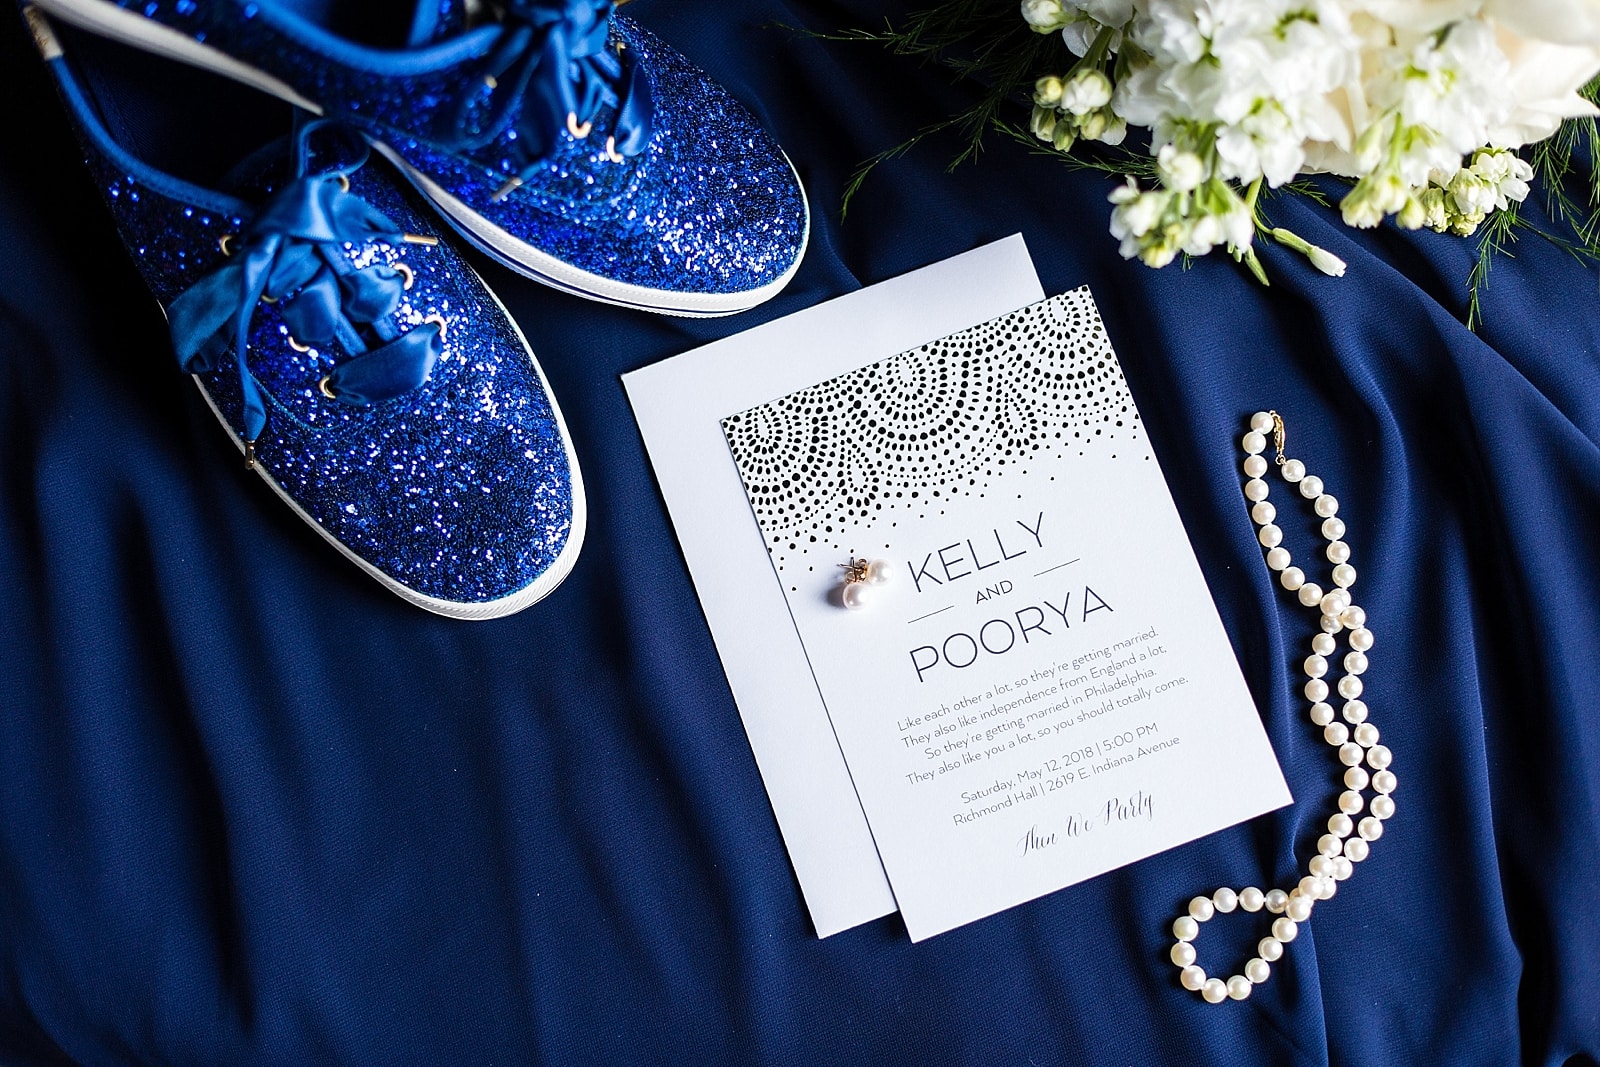 Blue Sequined Kate Spade Kids with bride's pearl necklace, wedding invitation inspiration